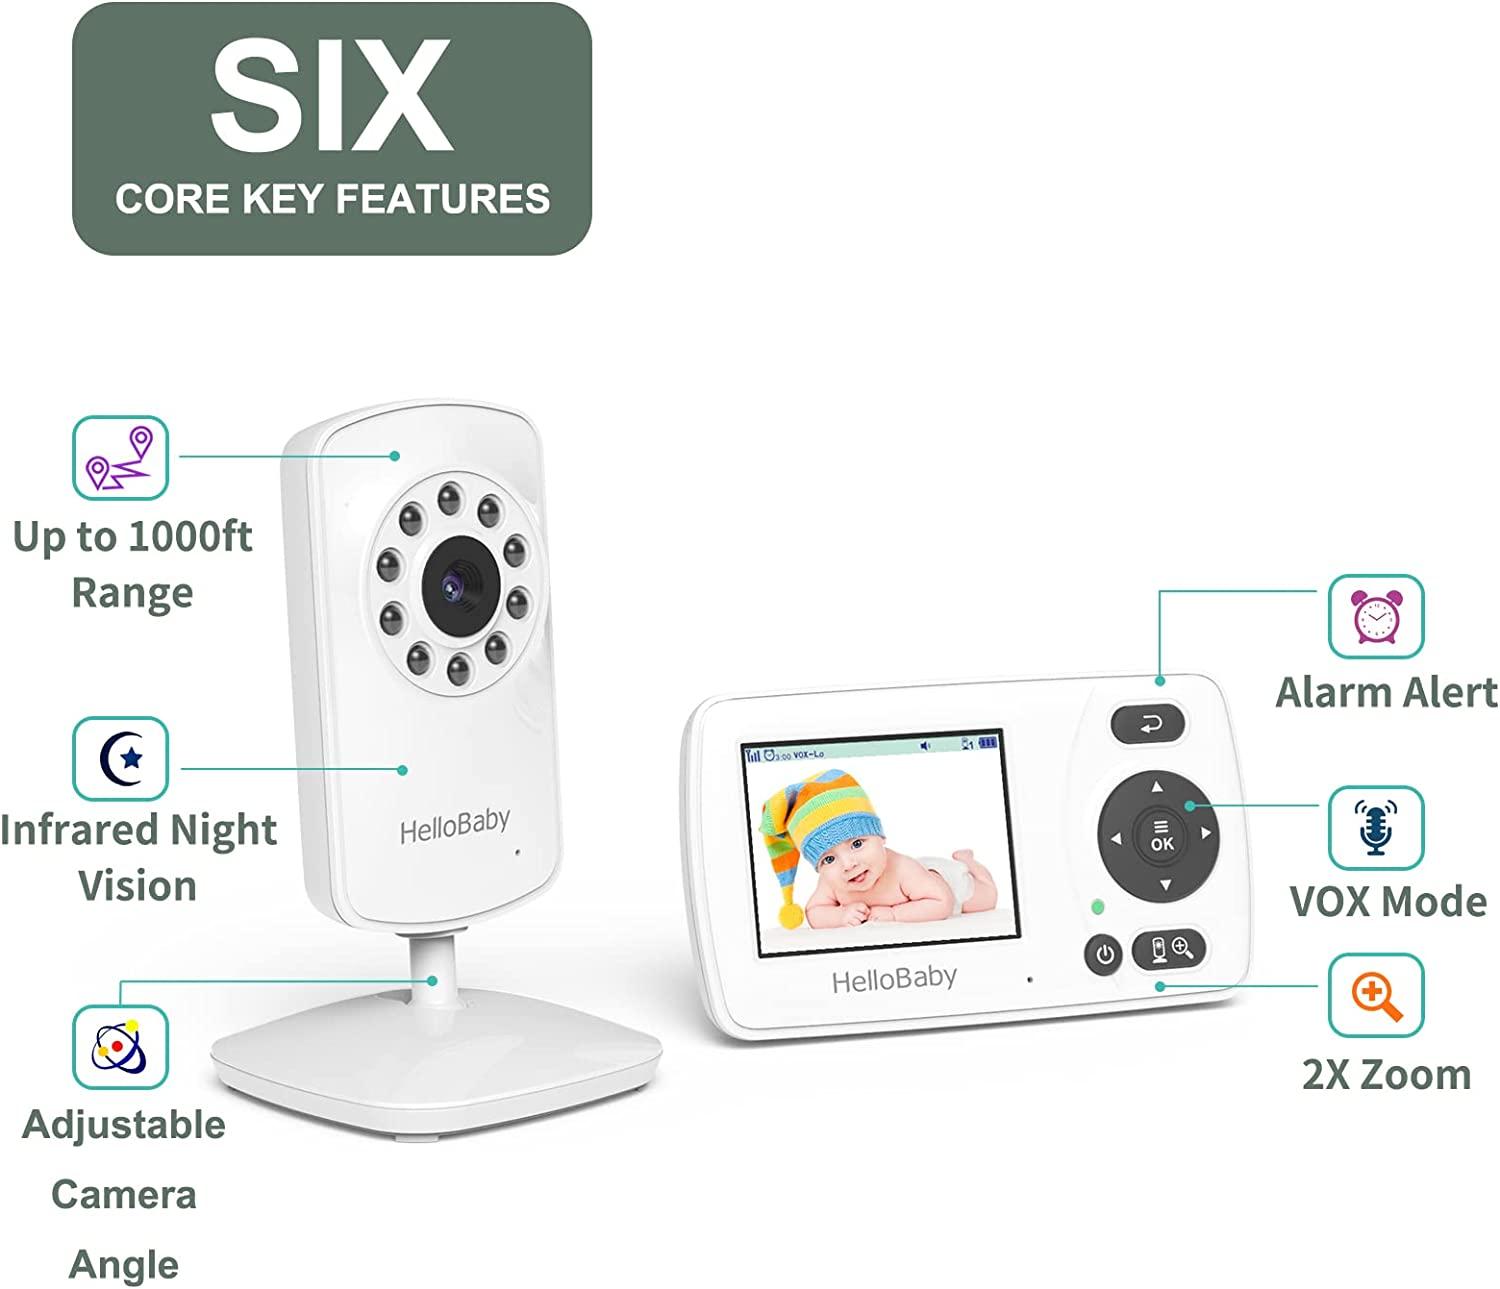 HelloBaby monitor HB50T | Video Baby Monitor with Camera and Audio